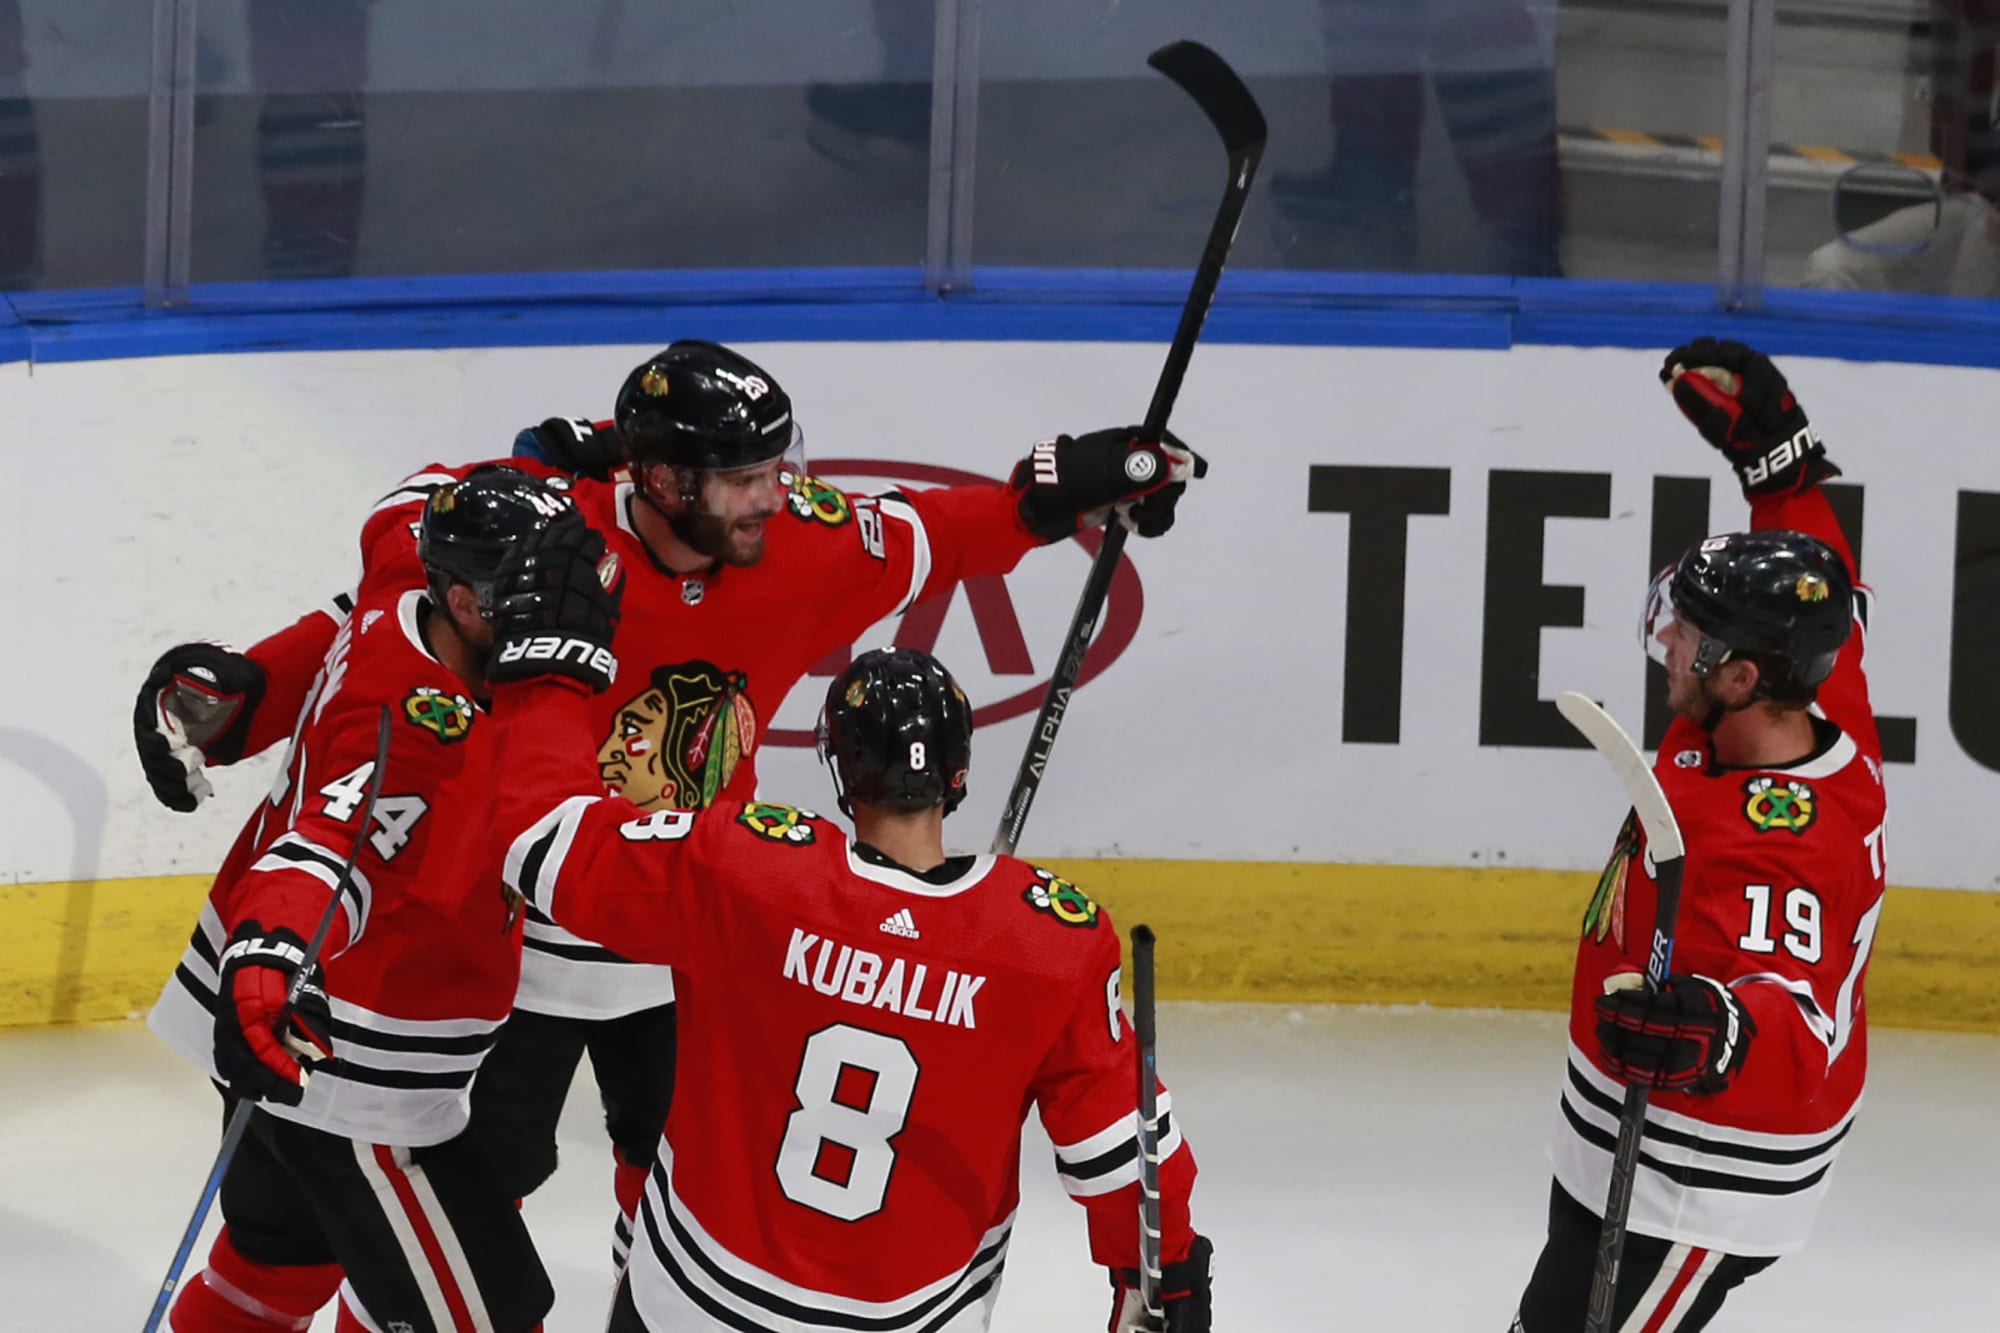 Saad helps deliver in must-win game for Hawks